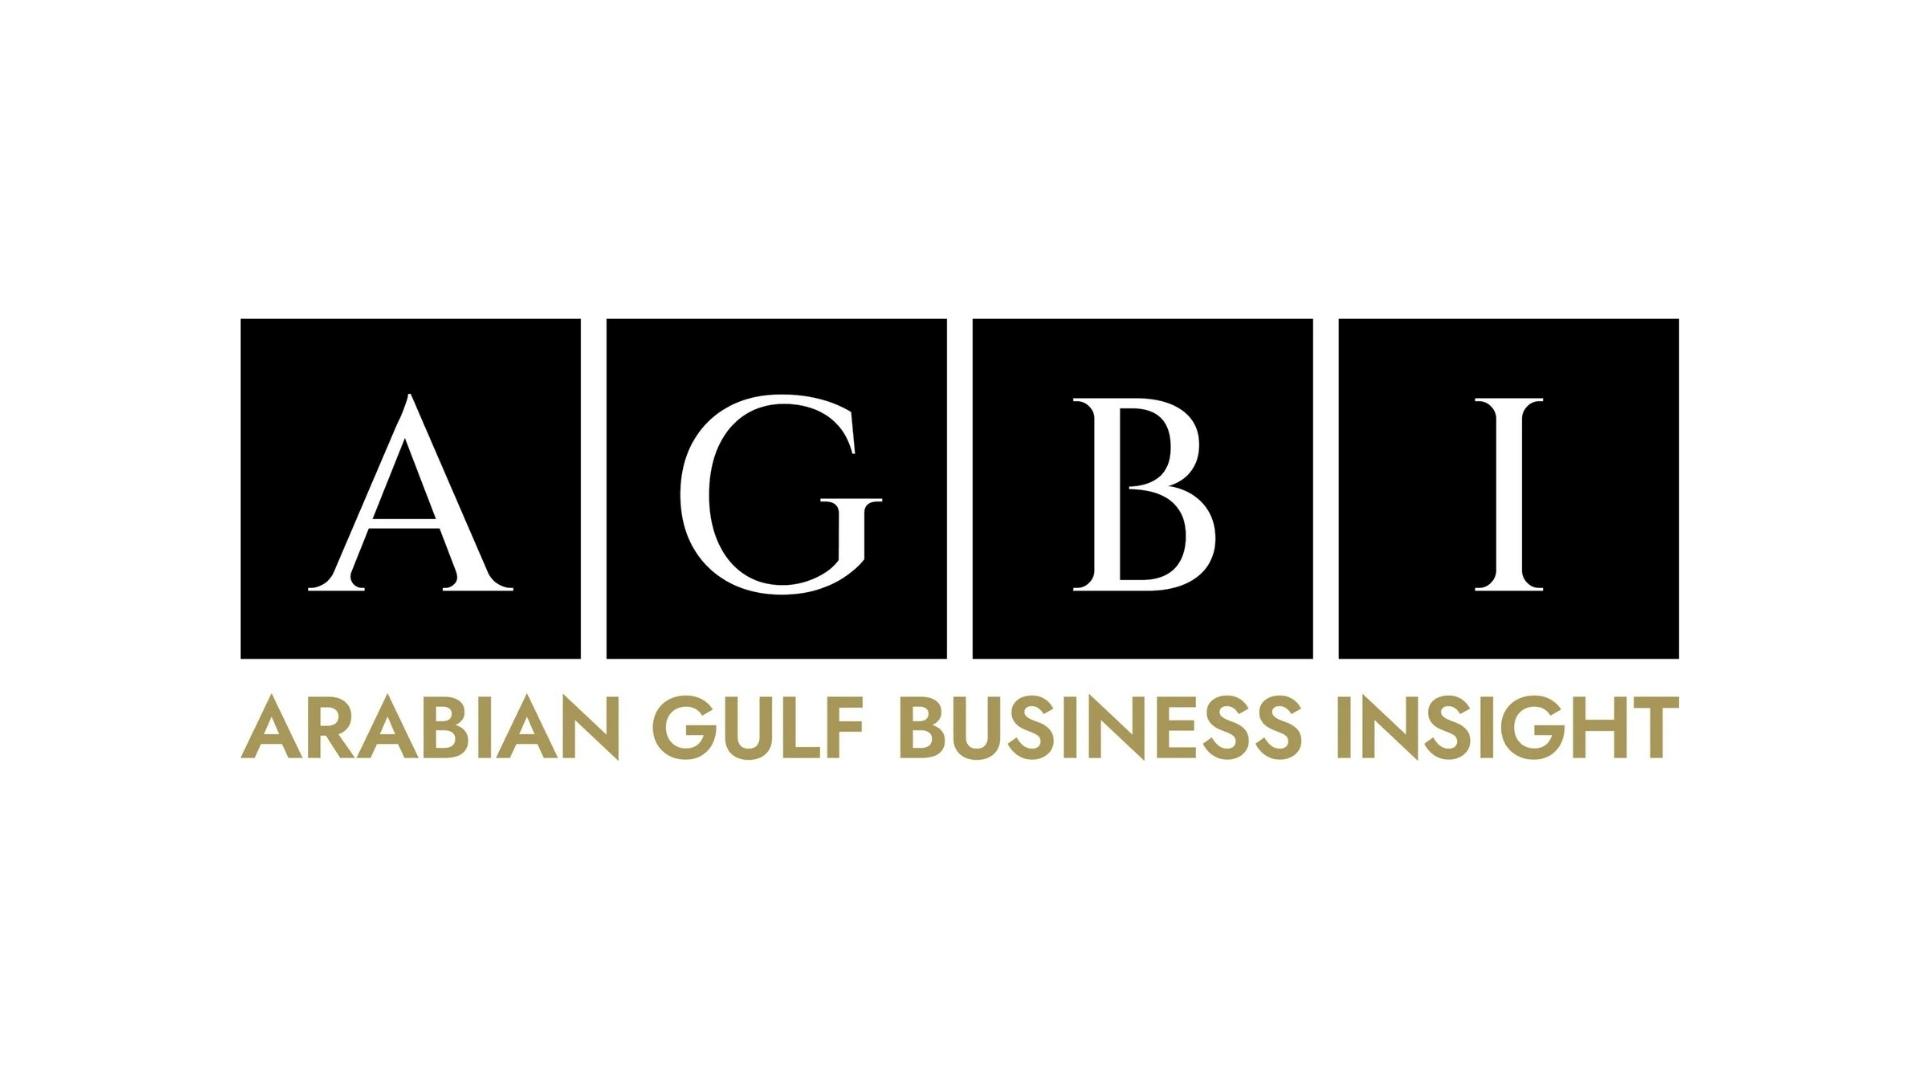 Arabian Gulf Business Insight | Cairo is the tech hub of Africa – and it’s just getting started